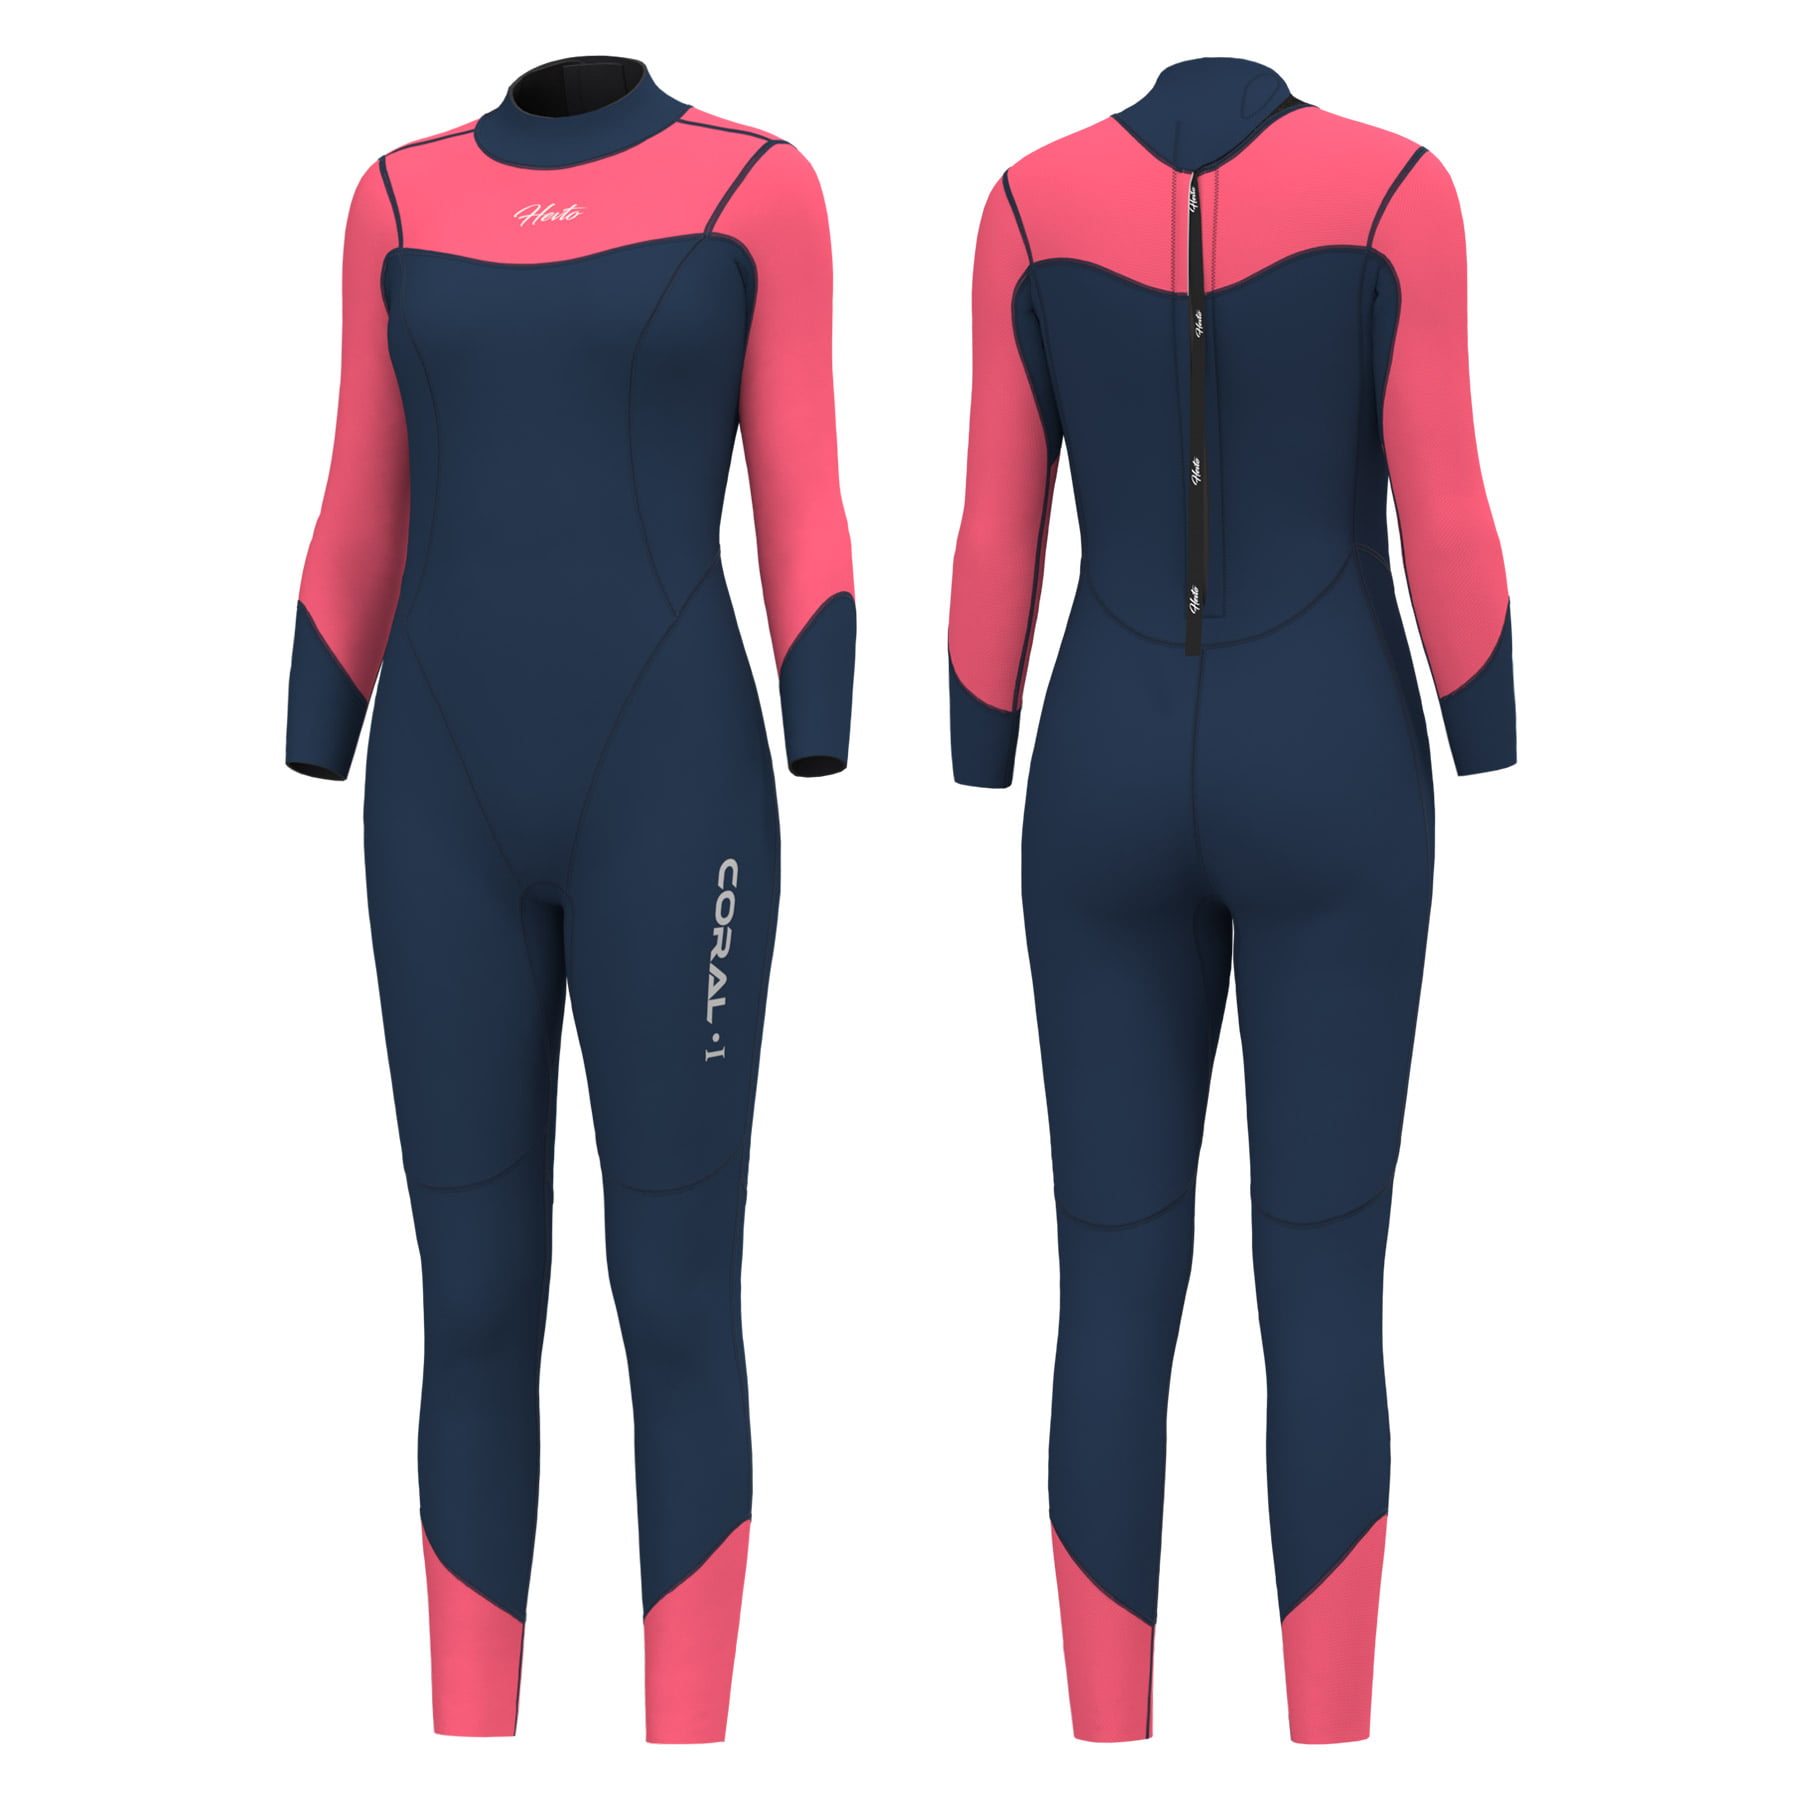 Hevto Shorty Wetsuits X Men and Women 3mm Neoprene Scuba Diving Suits Surfing Swimming Short Sleeve Back Zip 